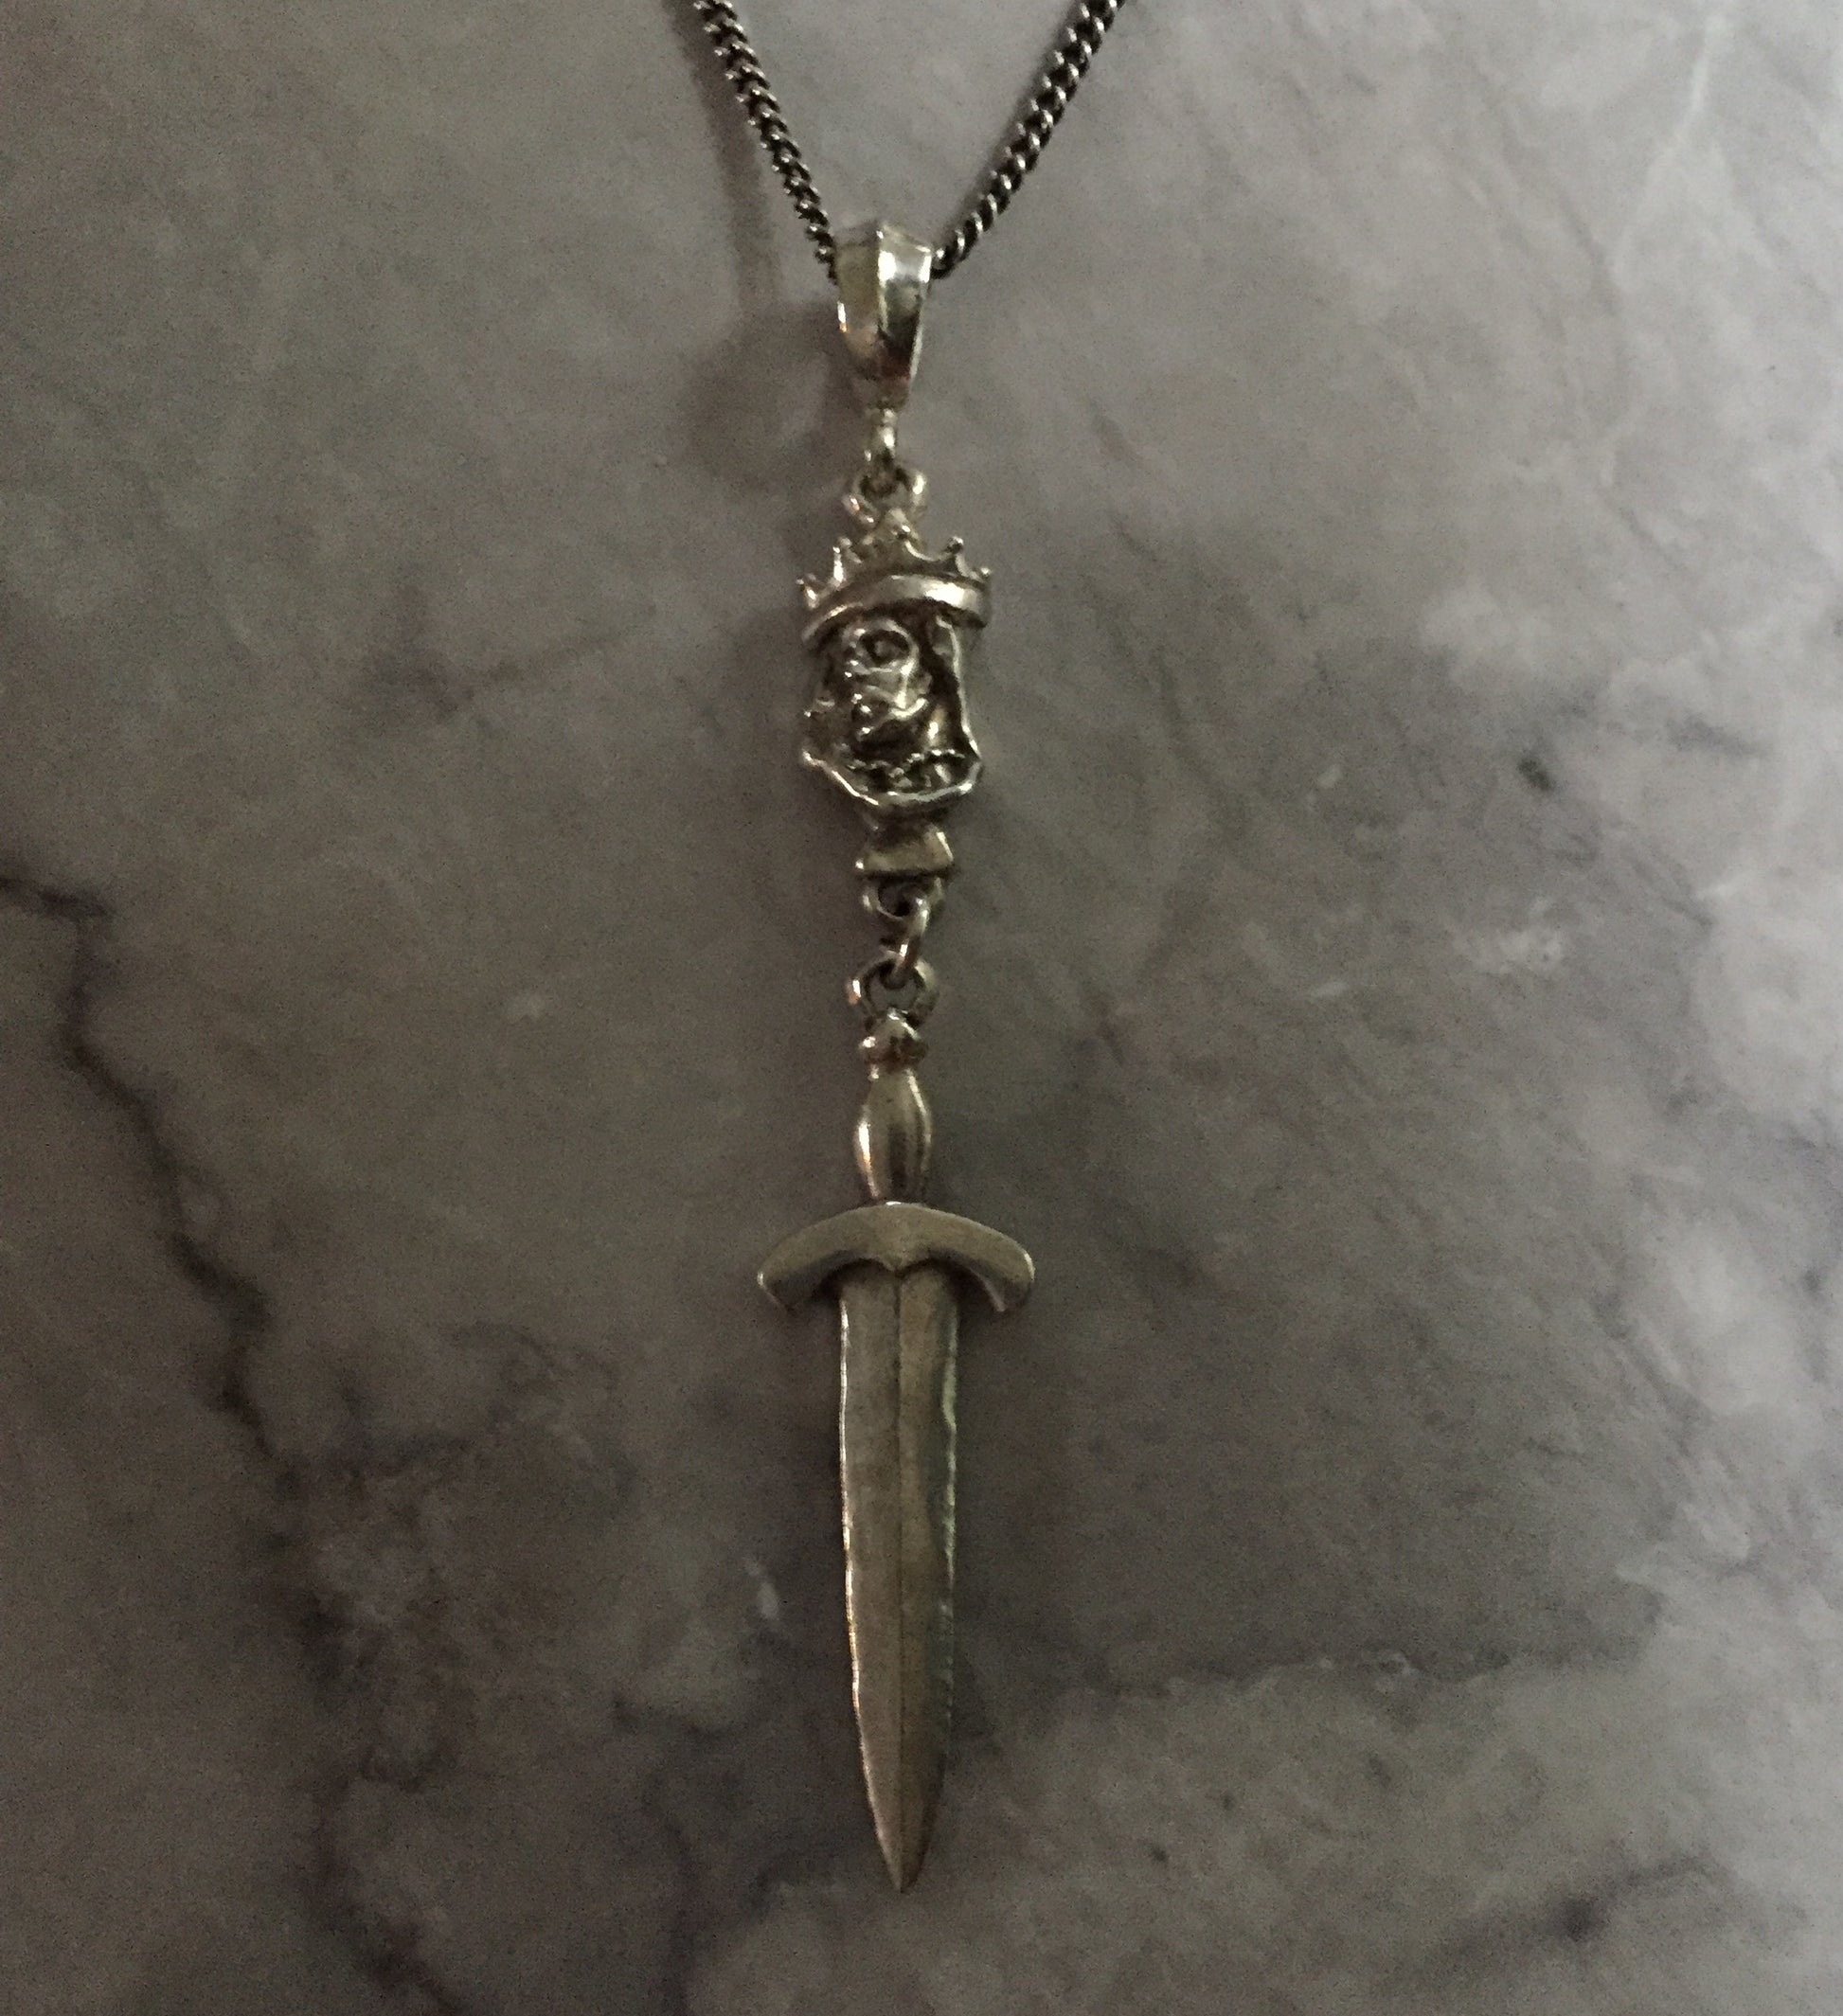 Silver King Sword Necklace by Roman Paul